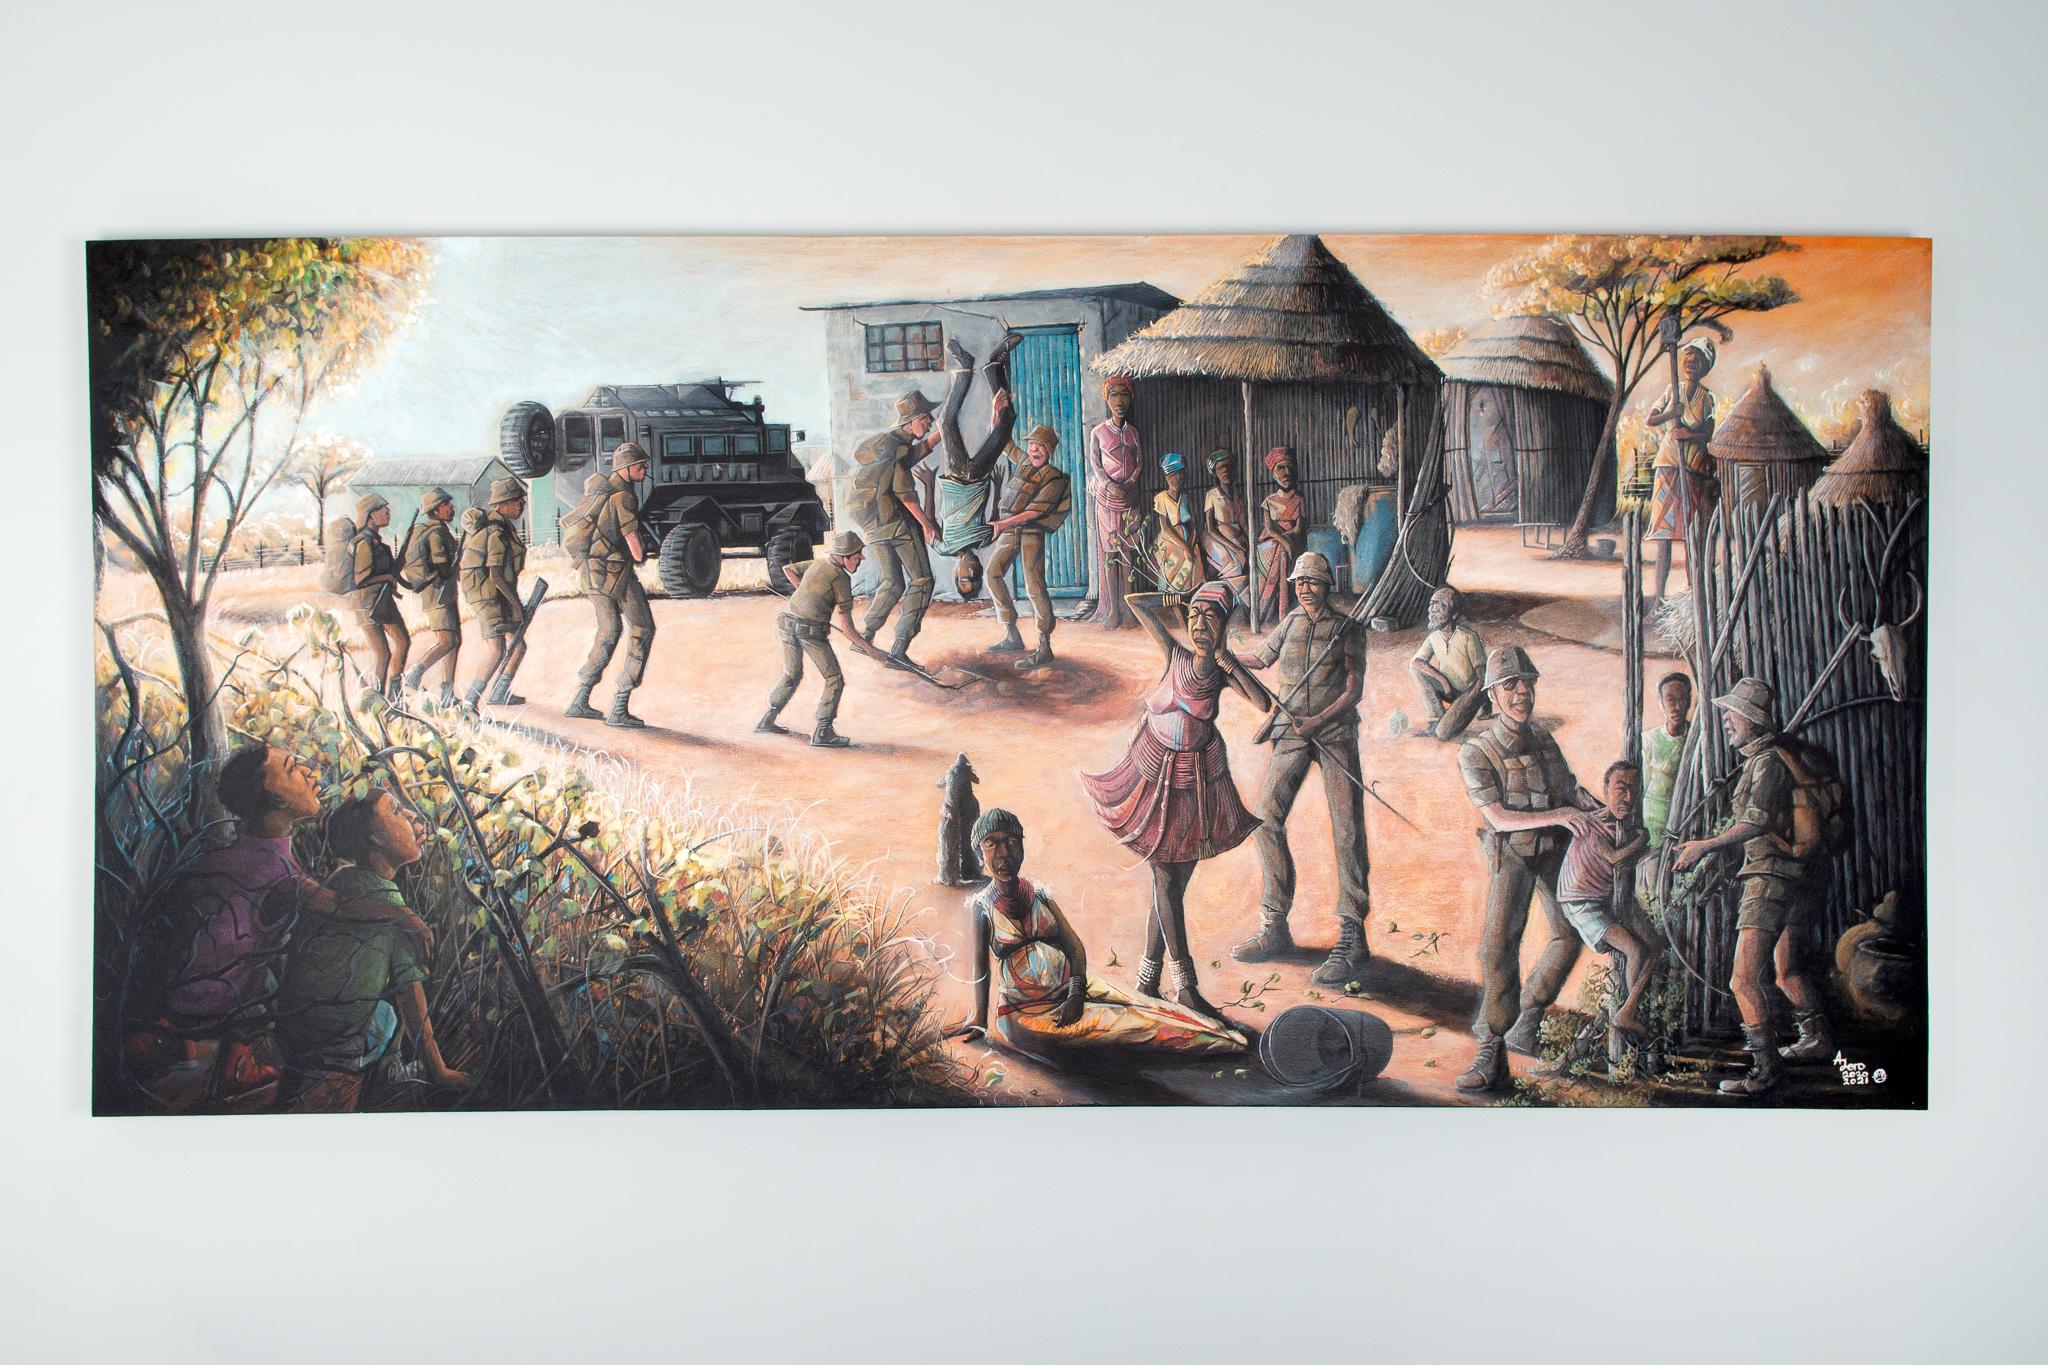 We Remember, 2020-2021, Acrylic on canvas

This artwork formed part of the 'Finding Memories: additions to an everyday archive of Independence' exhibition hosted in 2021. Stretching 2 metres wide, Amuthenu’s painting is, in his words, a “collage” of